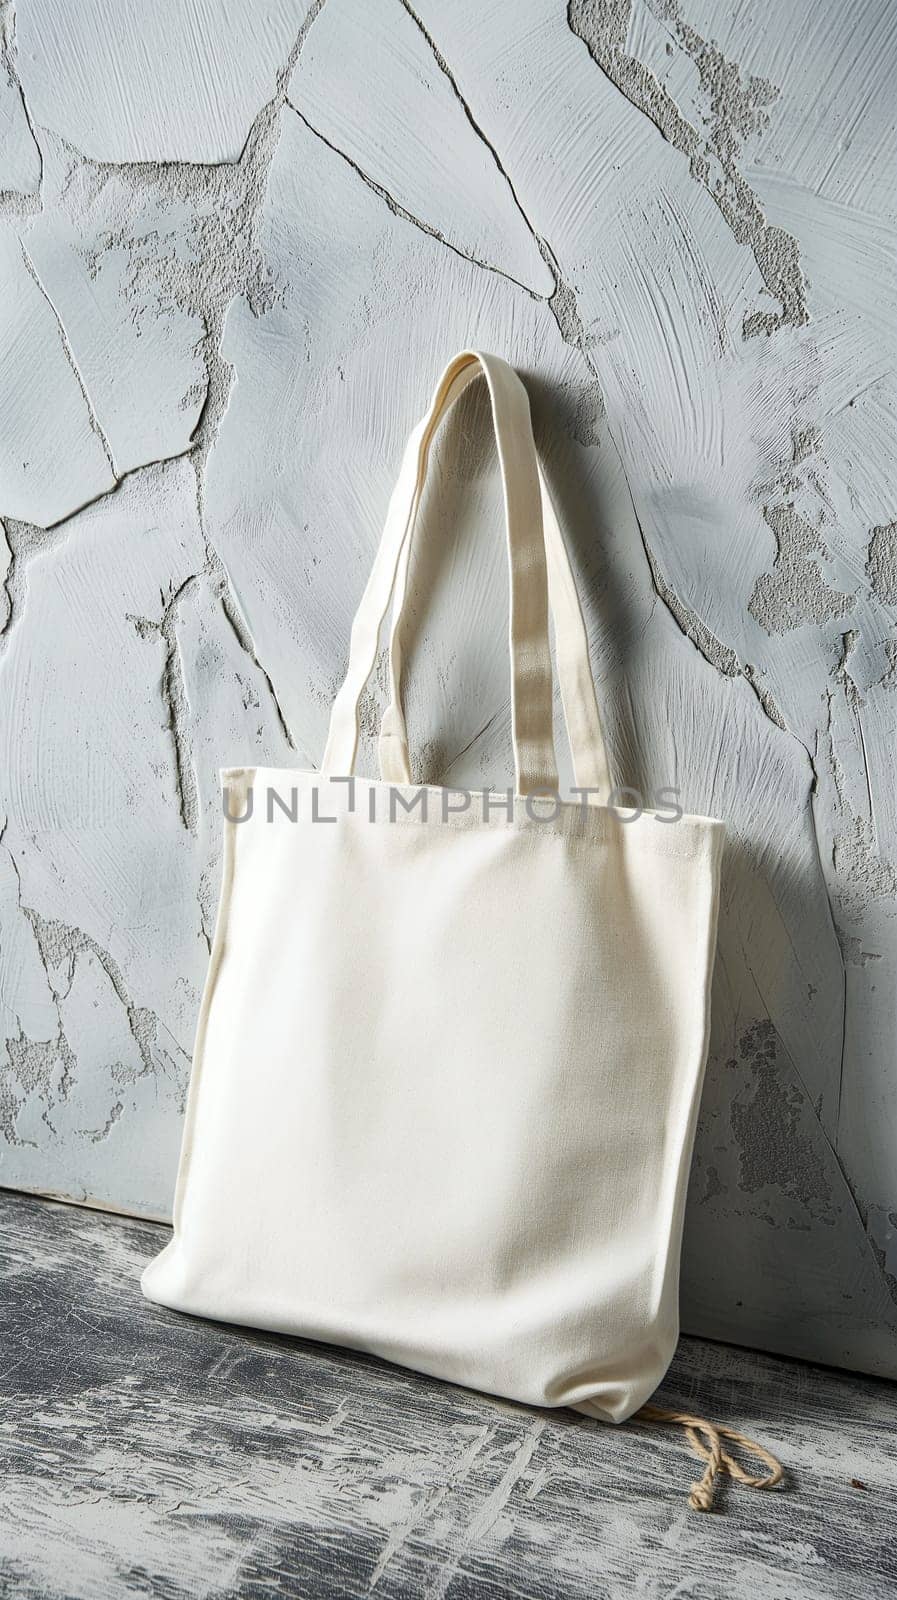 Plain canvas tote bag hangs against a textured wooden backdrop with copy space, ideal for branding mockups